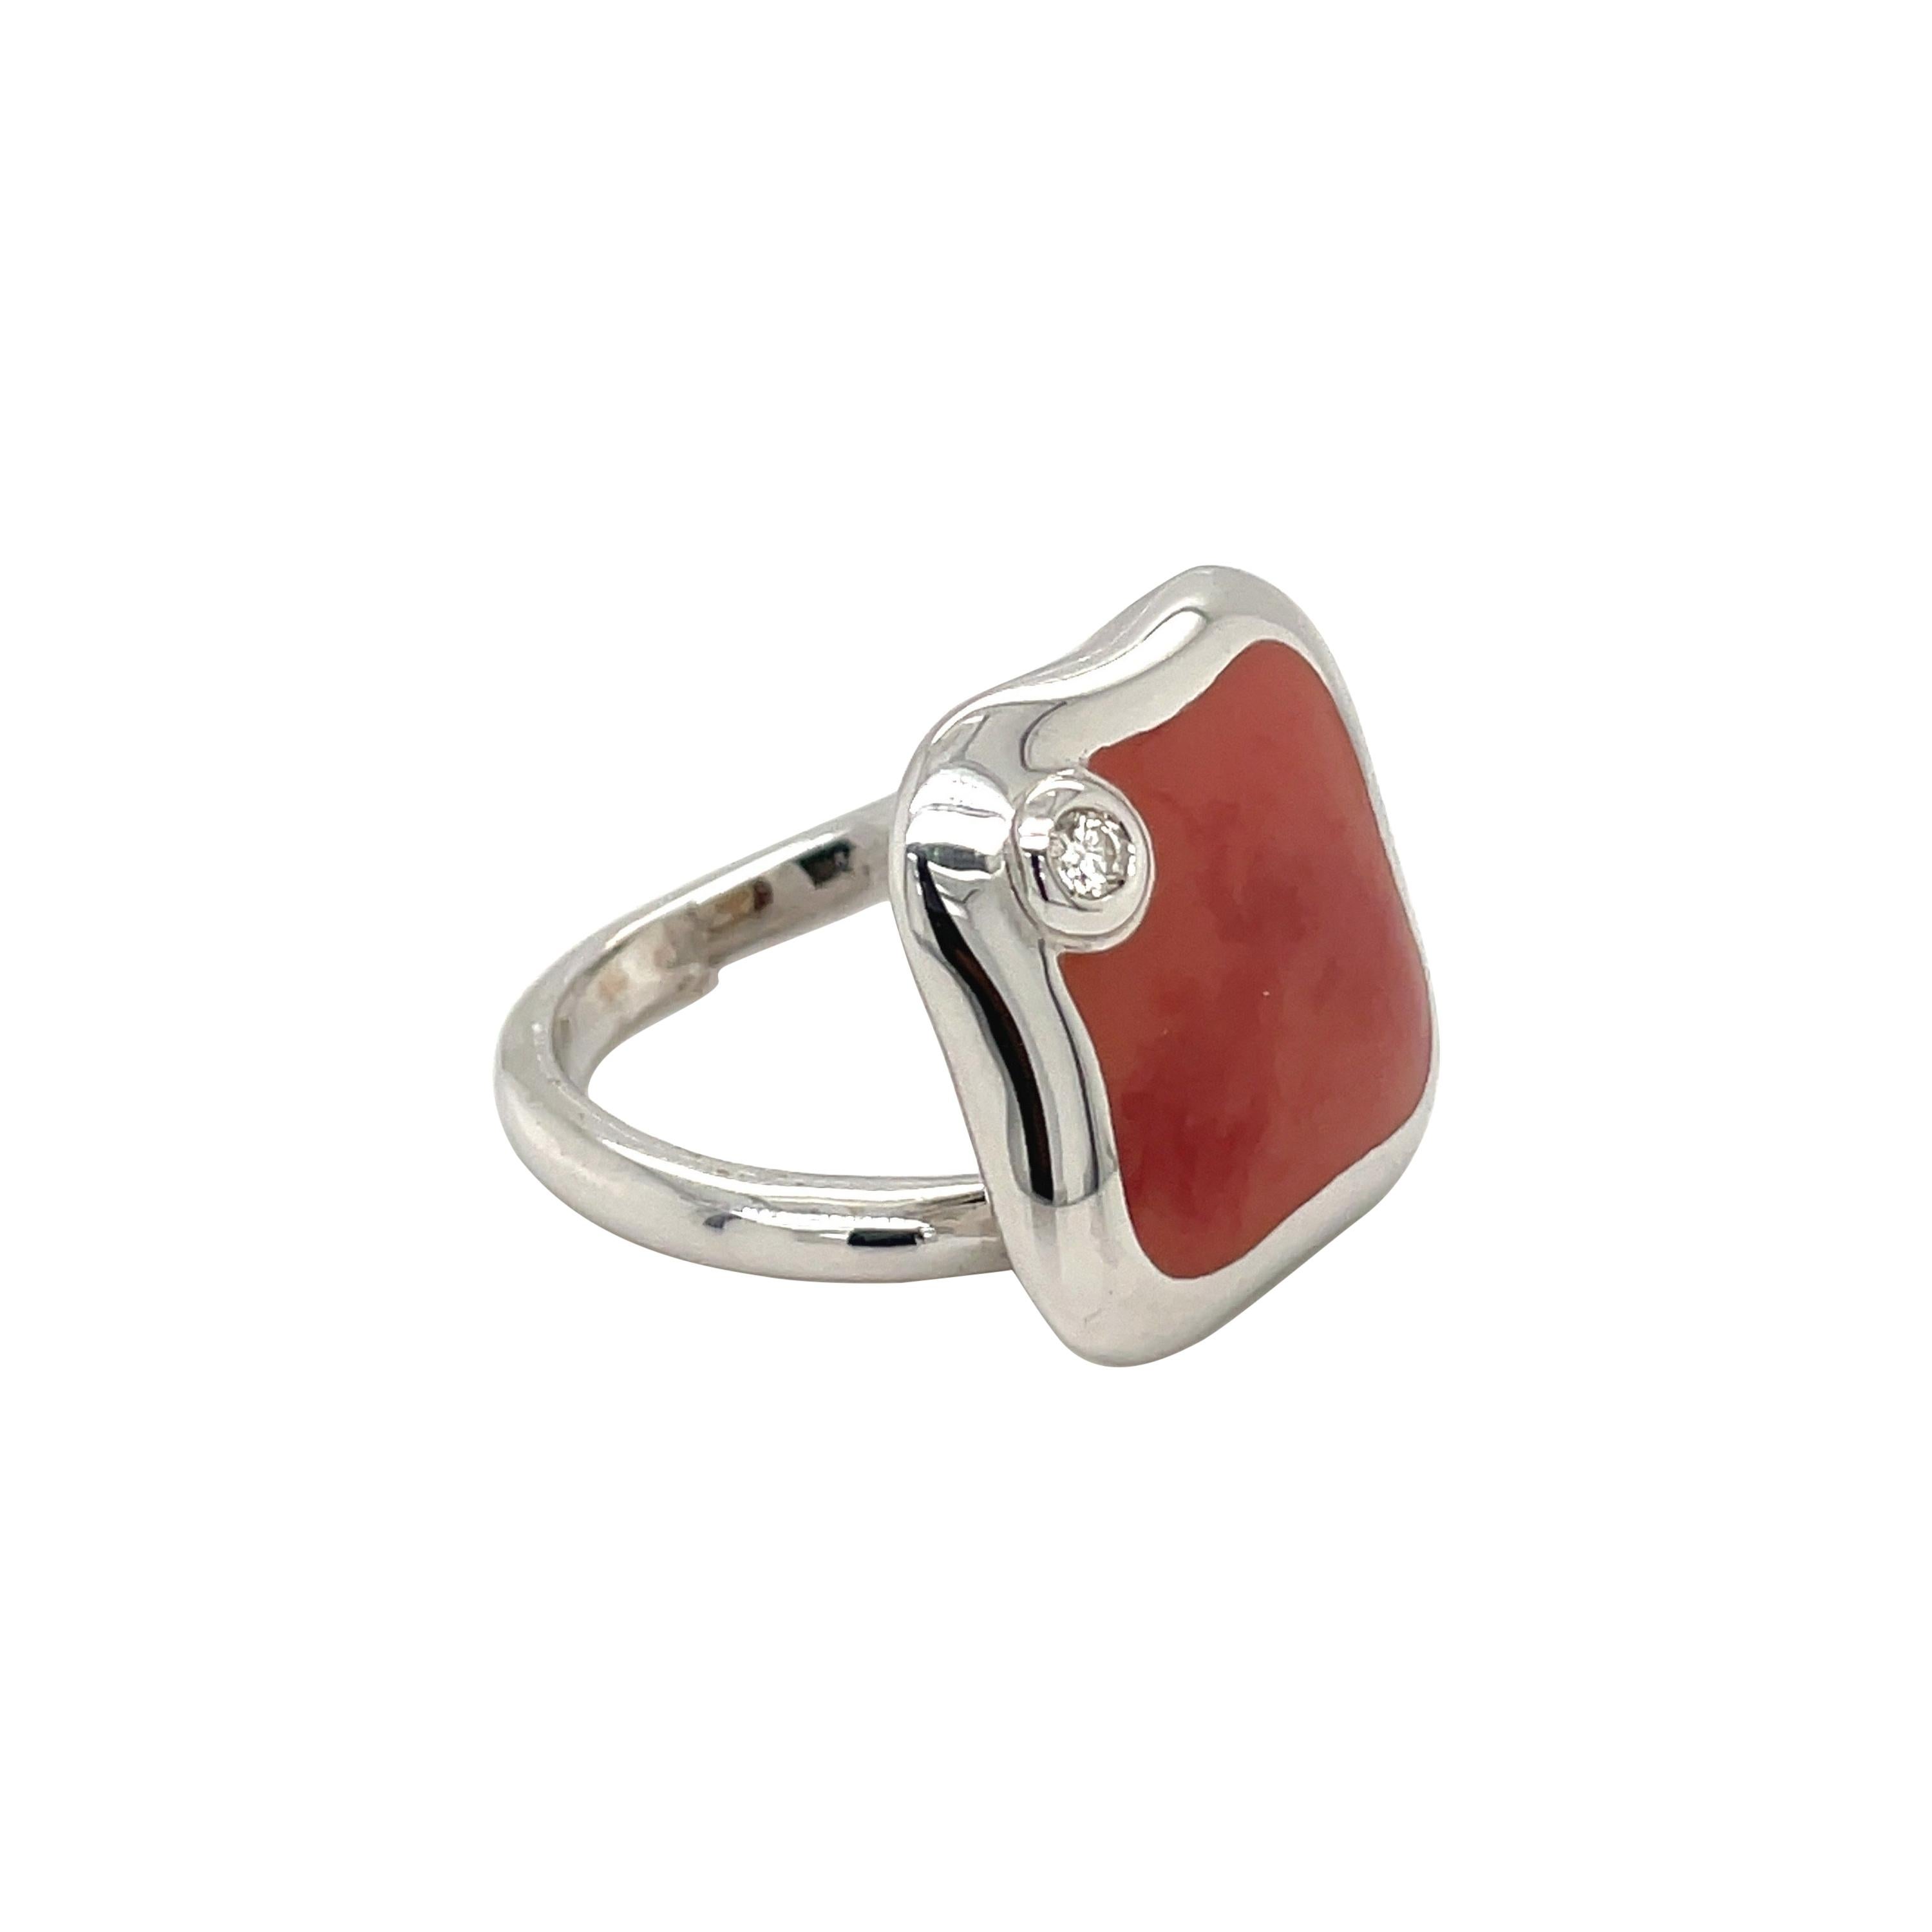 La Nouvelle Bague 18kt White Gold Fiori Ring with Red Enamel and Diamond